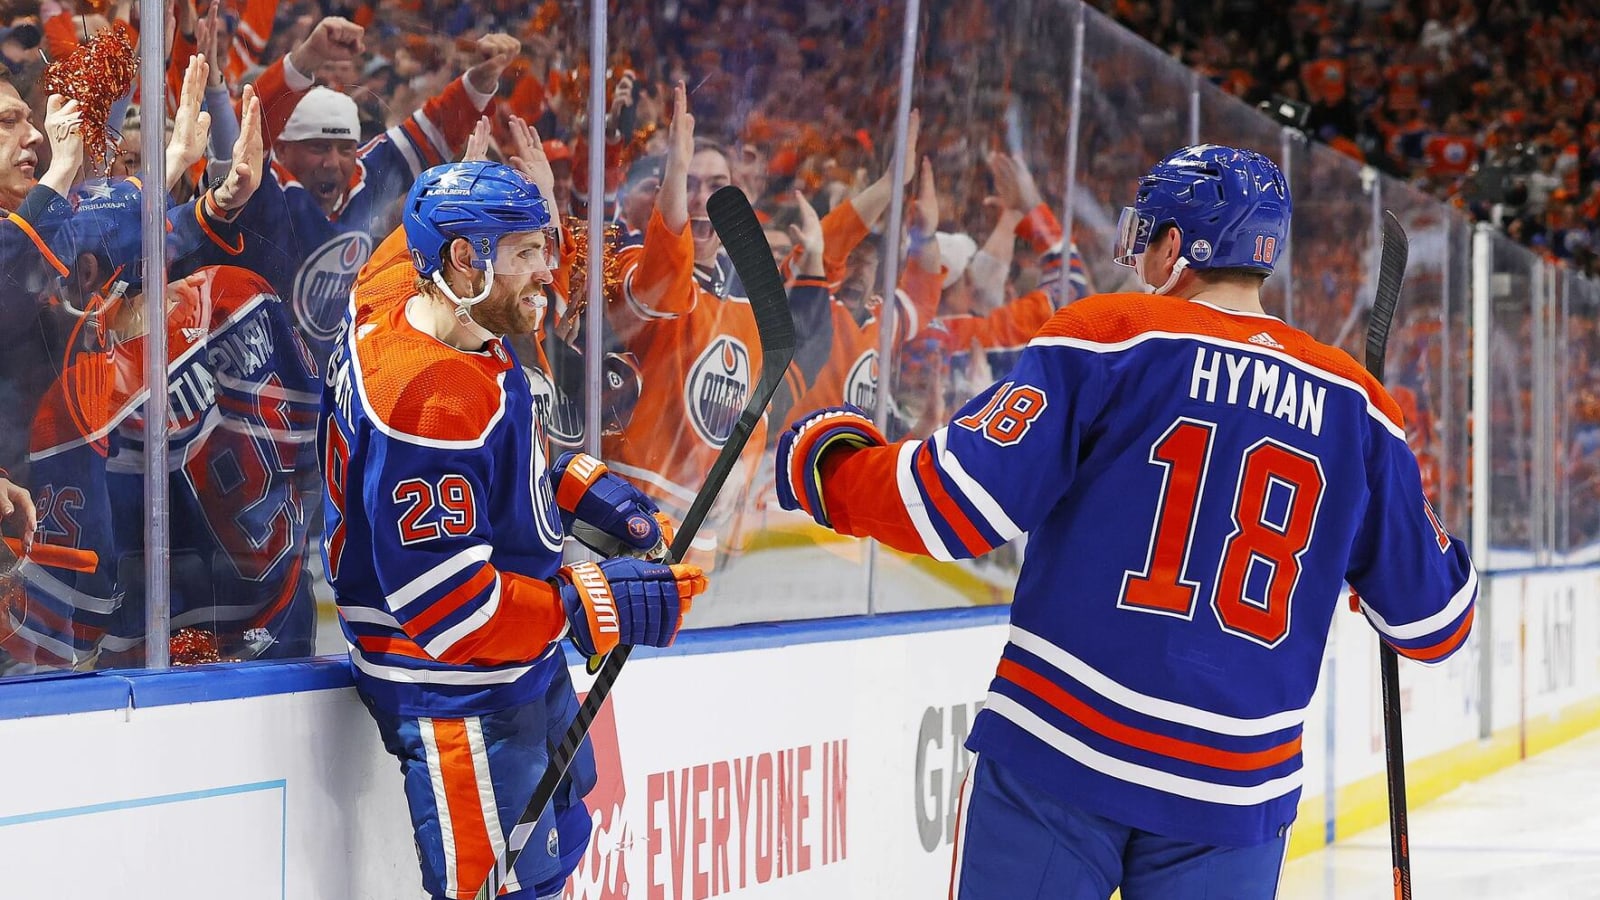 Three Oilers keys to victory, and three storylines ahead of Game 3